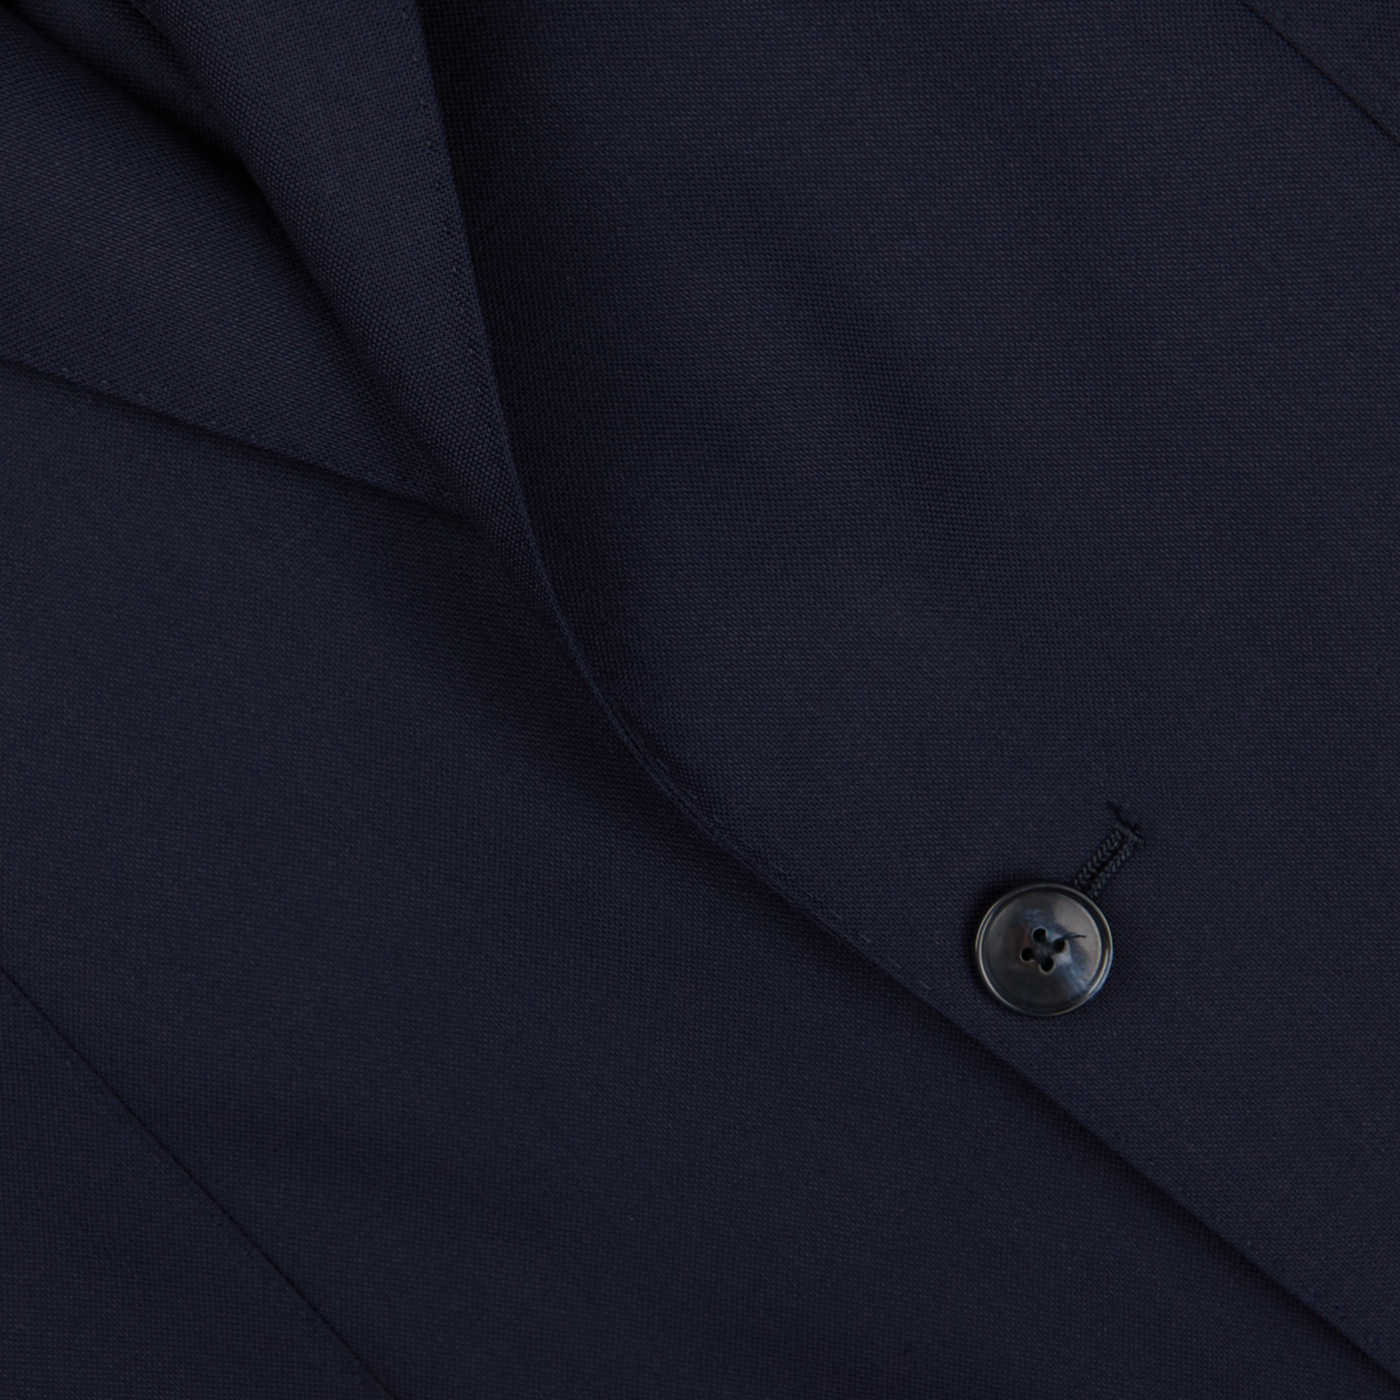 Close-up of a Baltzar Sartorial navy Super 100's wool suit jacket detail showing fabric texture and a button.